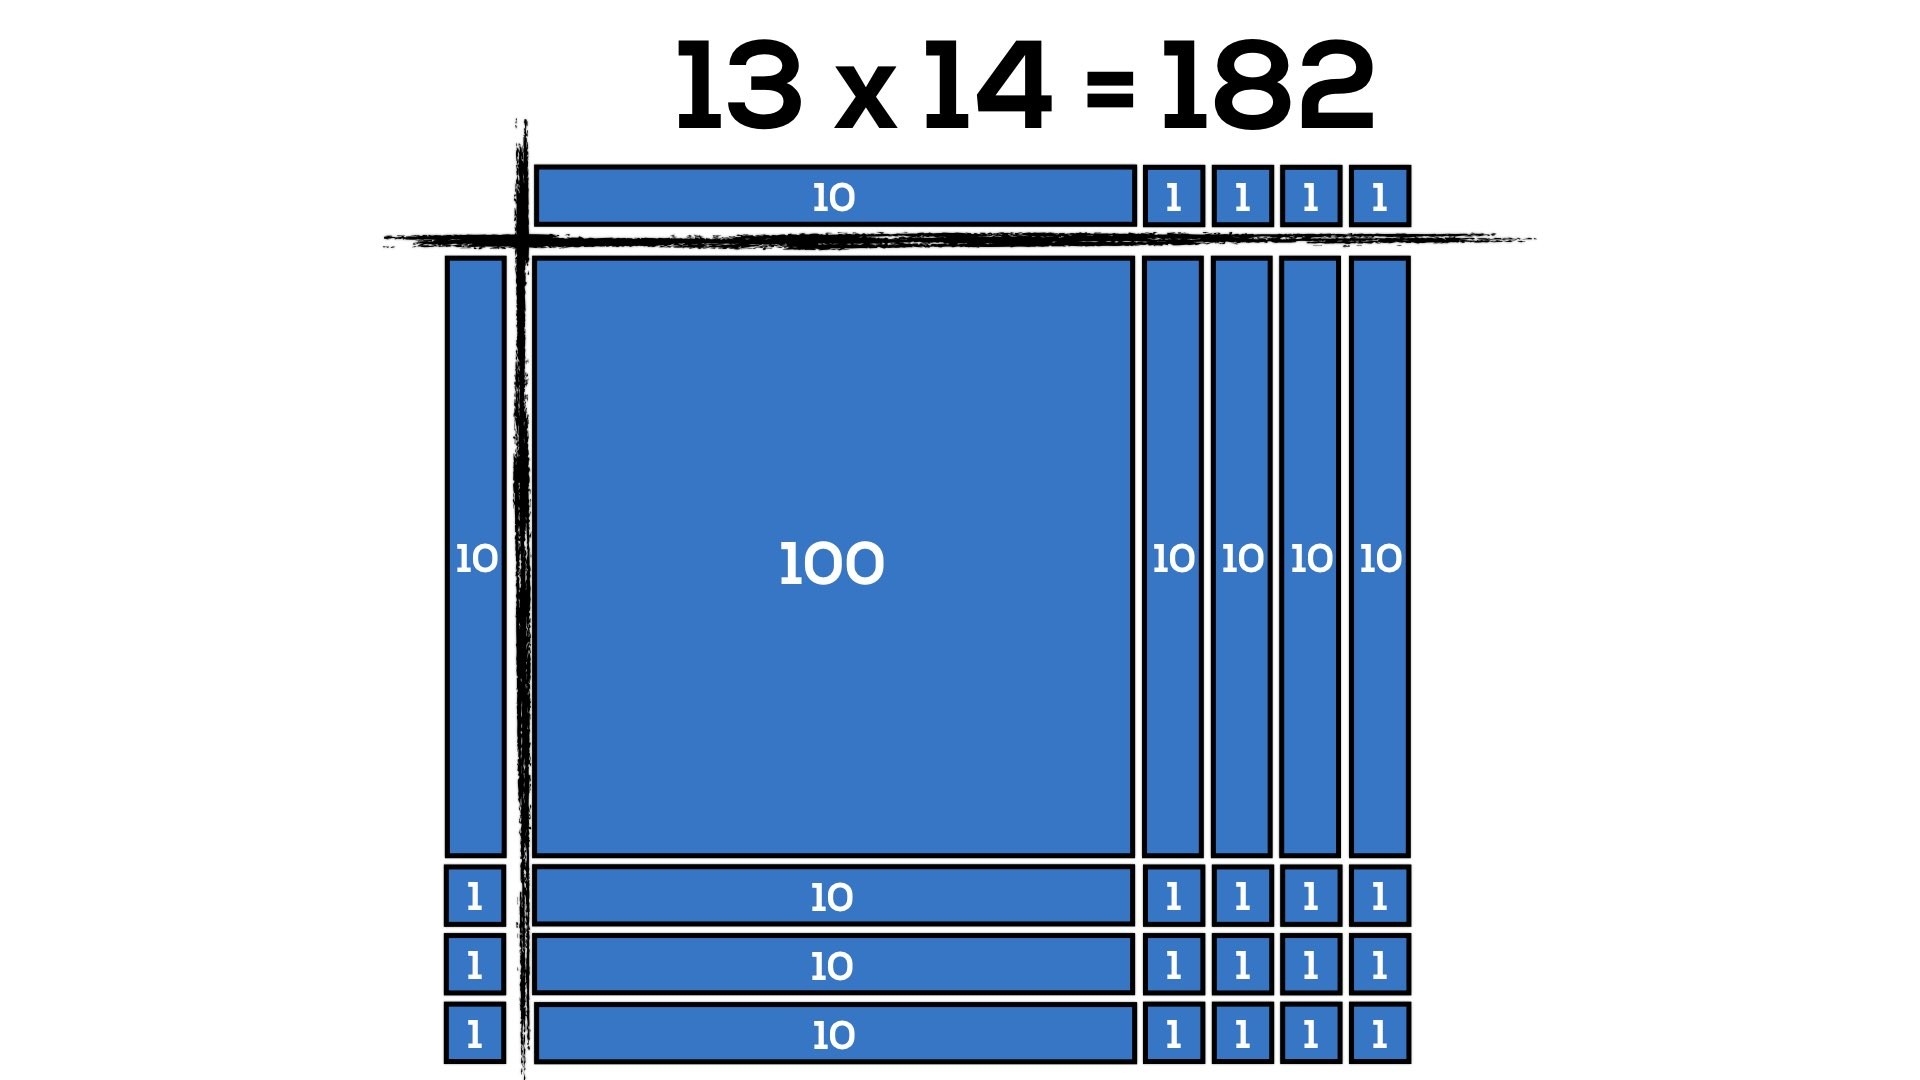 Japanese Multiplication With Lines - Array of 13 groups of 14